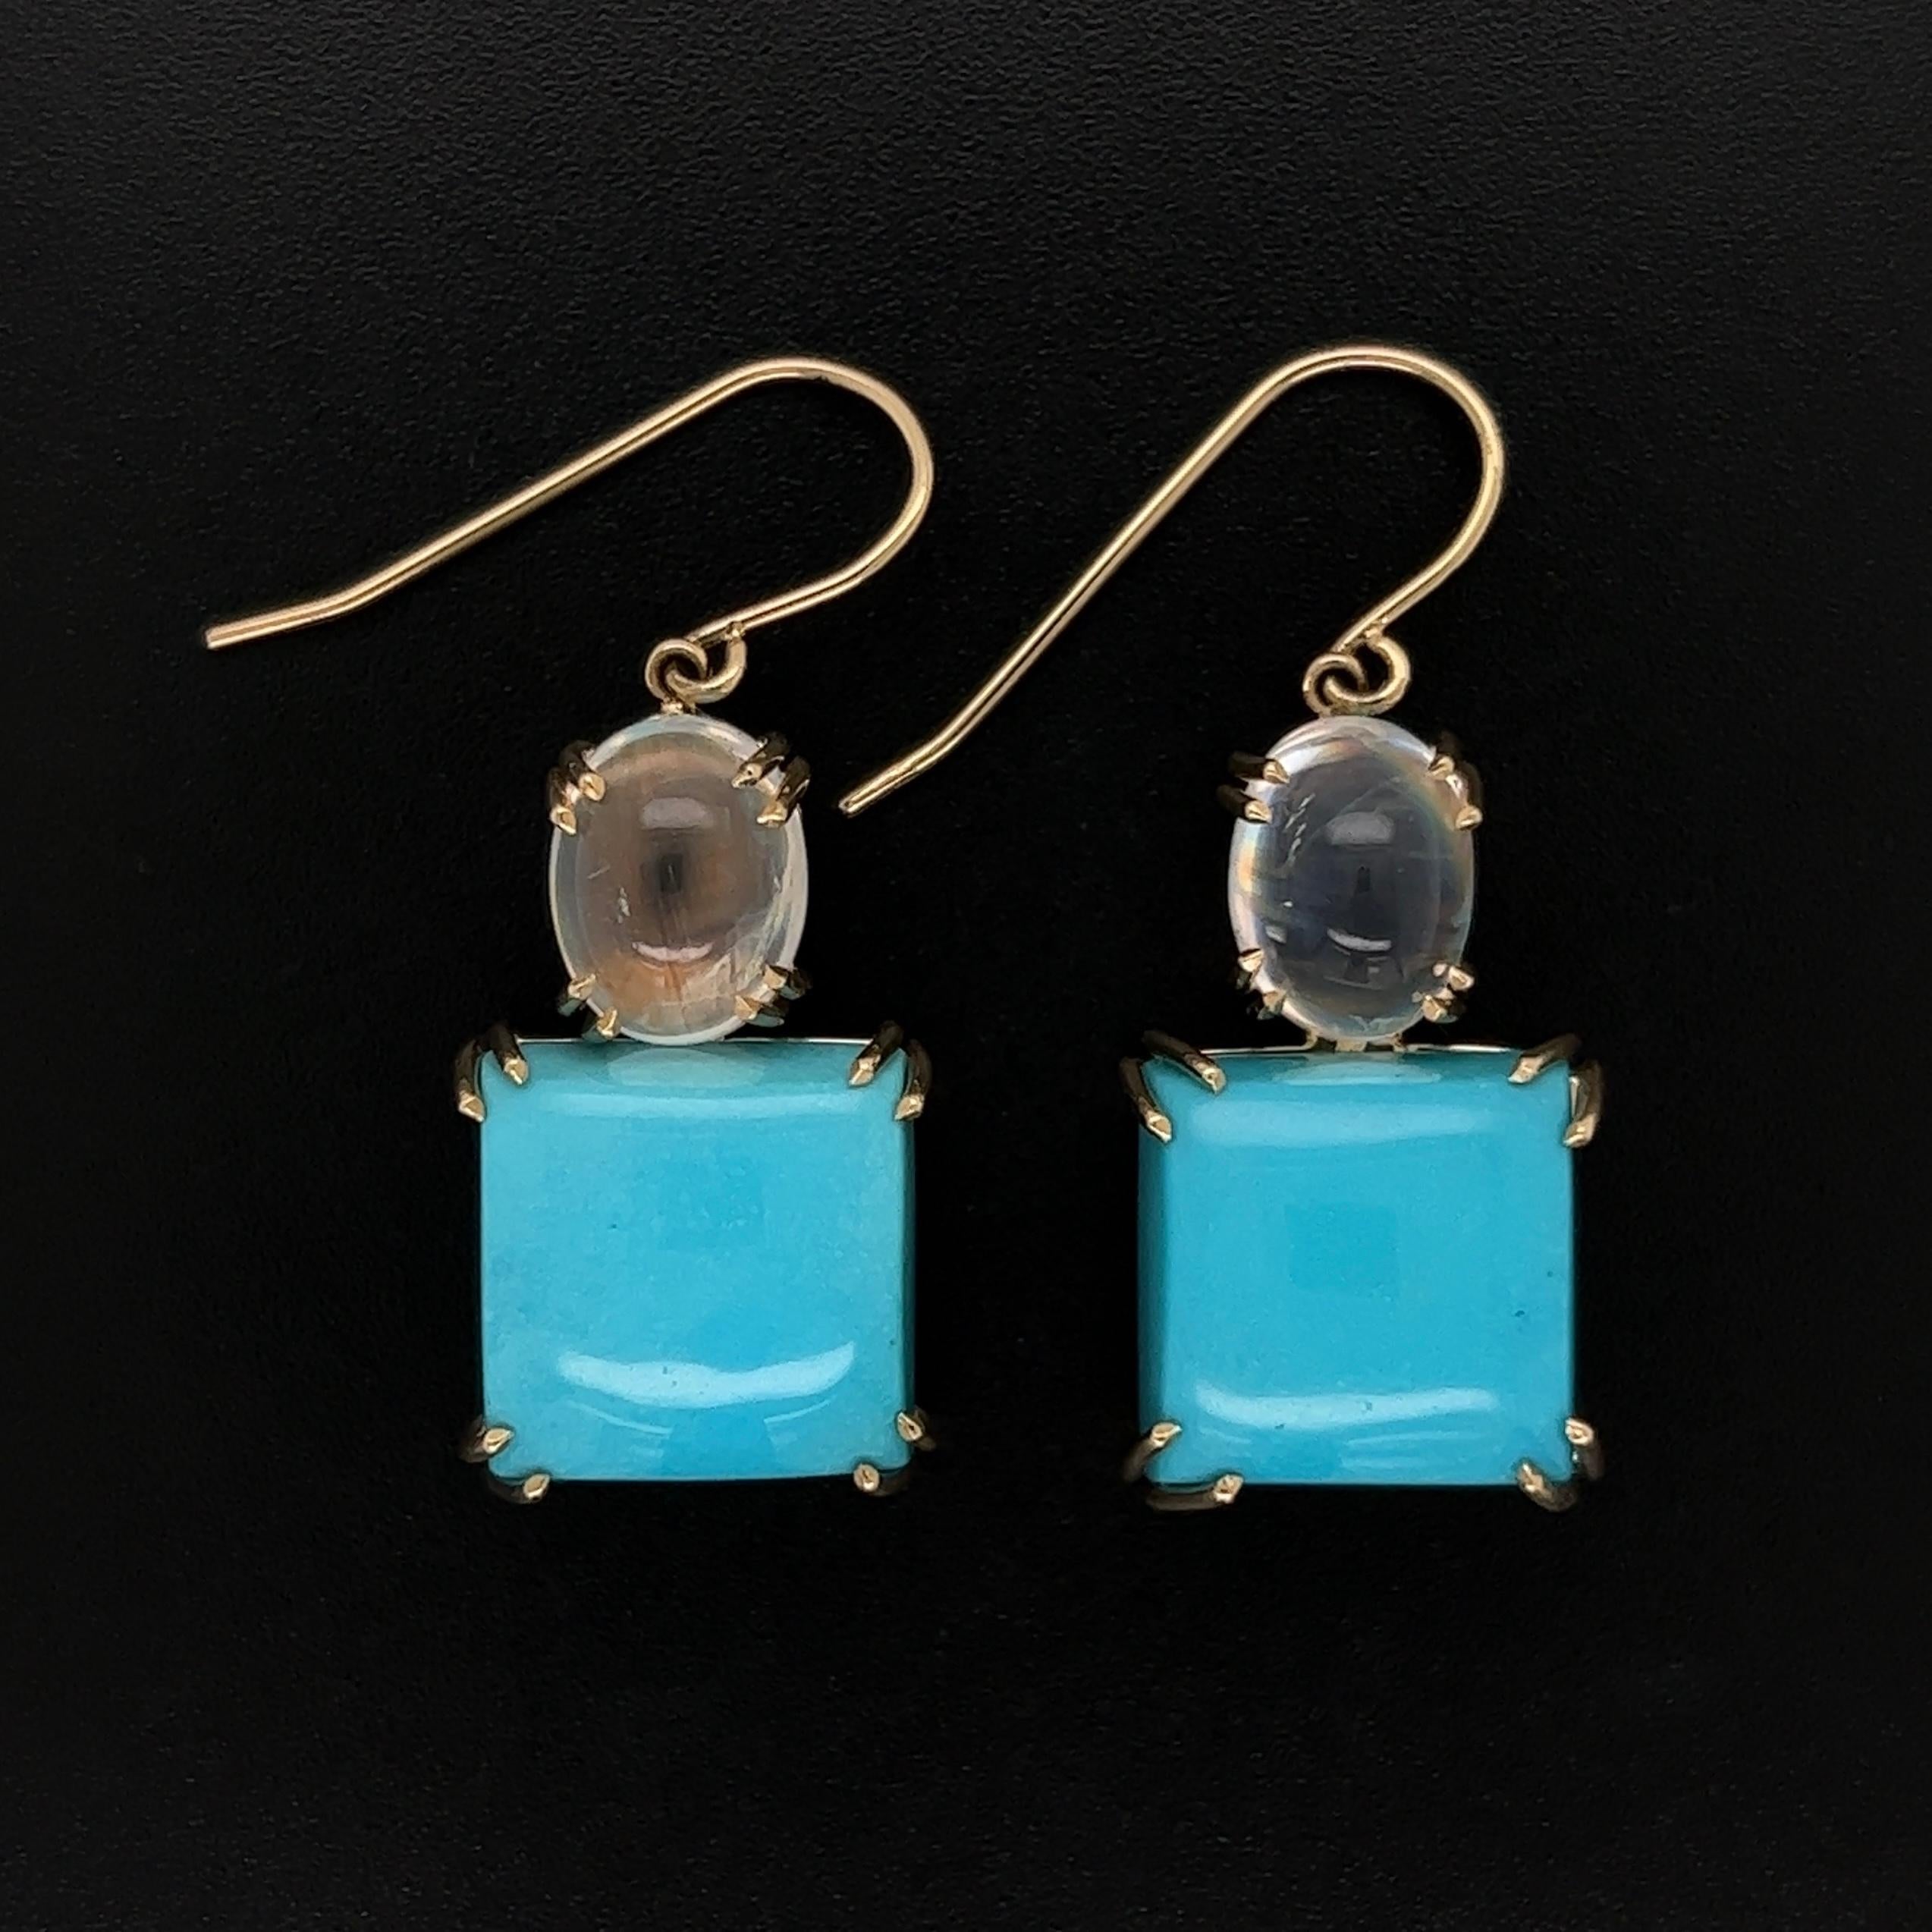 Simply Beautiful! Finely detailed 12.70tcw Square Turquoise and 1.55tcw Moonstone Dangle Earrings. Hand crafted in 14K Gold mounting. These Simple and Classic Stylish earrings, epitomize vintage charm. In excellent condition, recently professionally